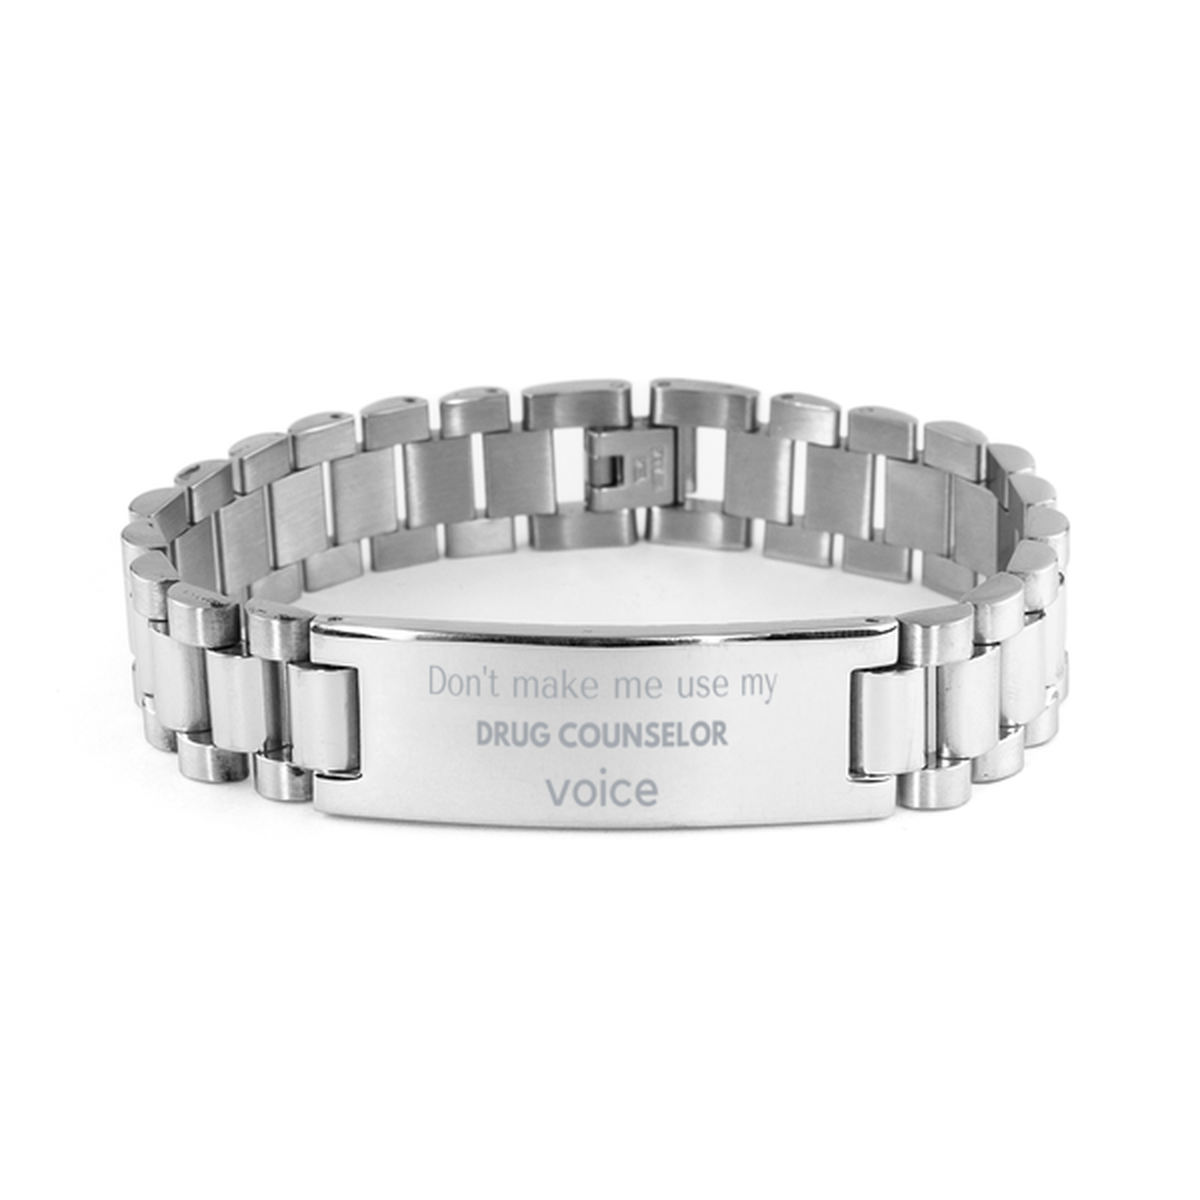 Don't make me use my Drug Counselor voice, Sarcasm Drug Counselor Gifts, Christmas Drug Counselor Ladder Stainless Steel Bracelet Birthday Unique Gifts For Drug Counselor Coworkers, Men, Women, Colleague, Friends